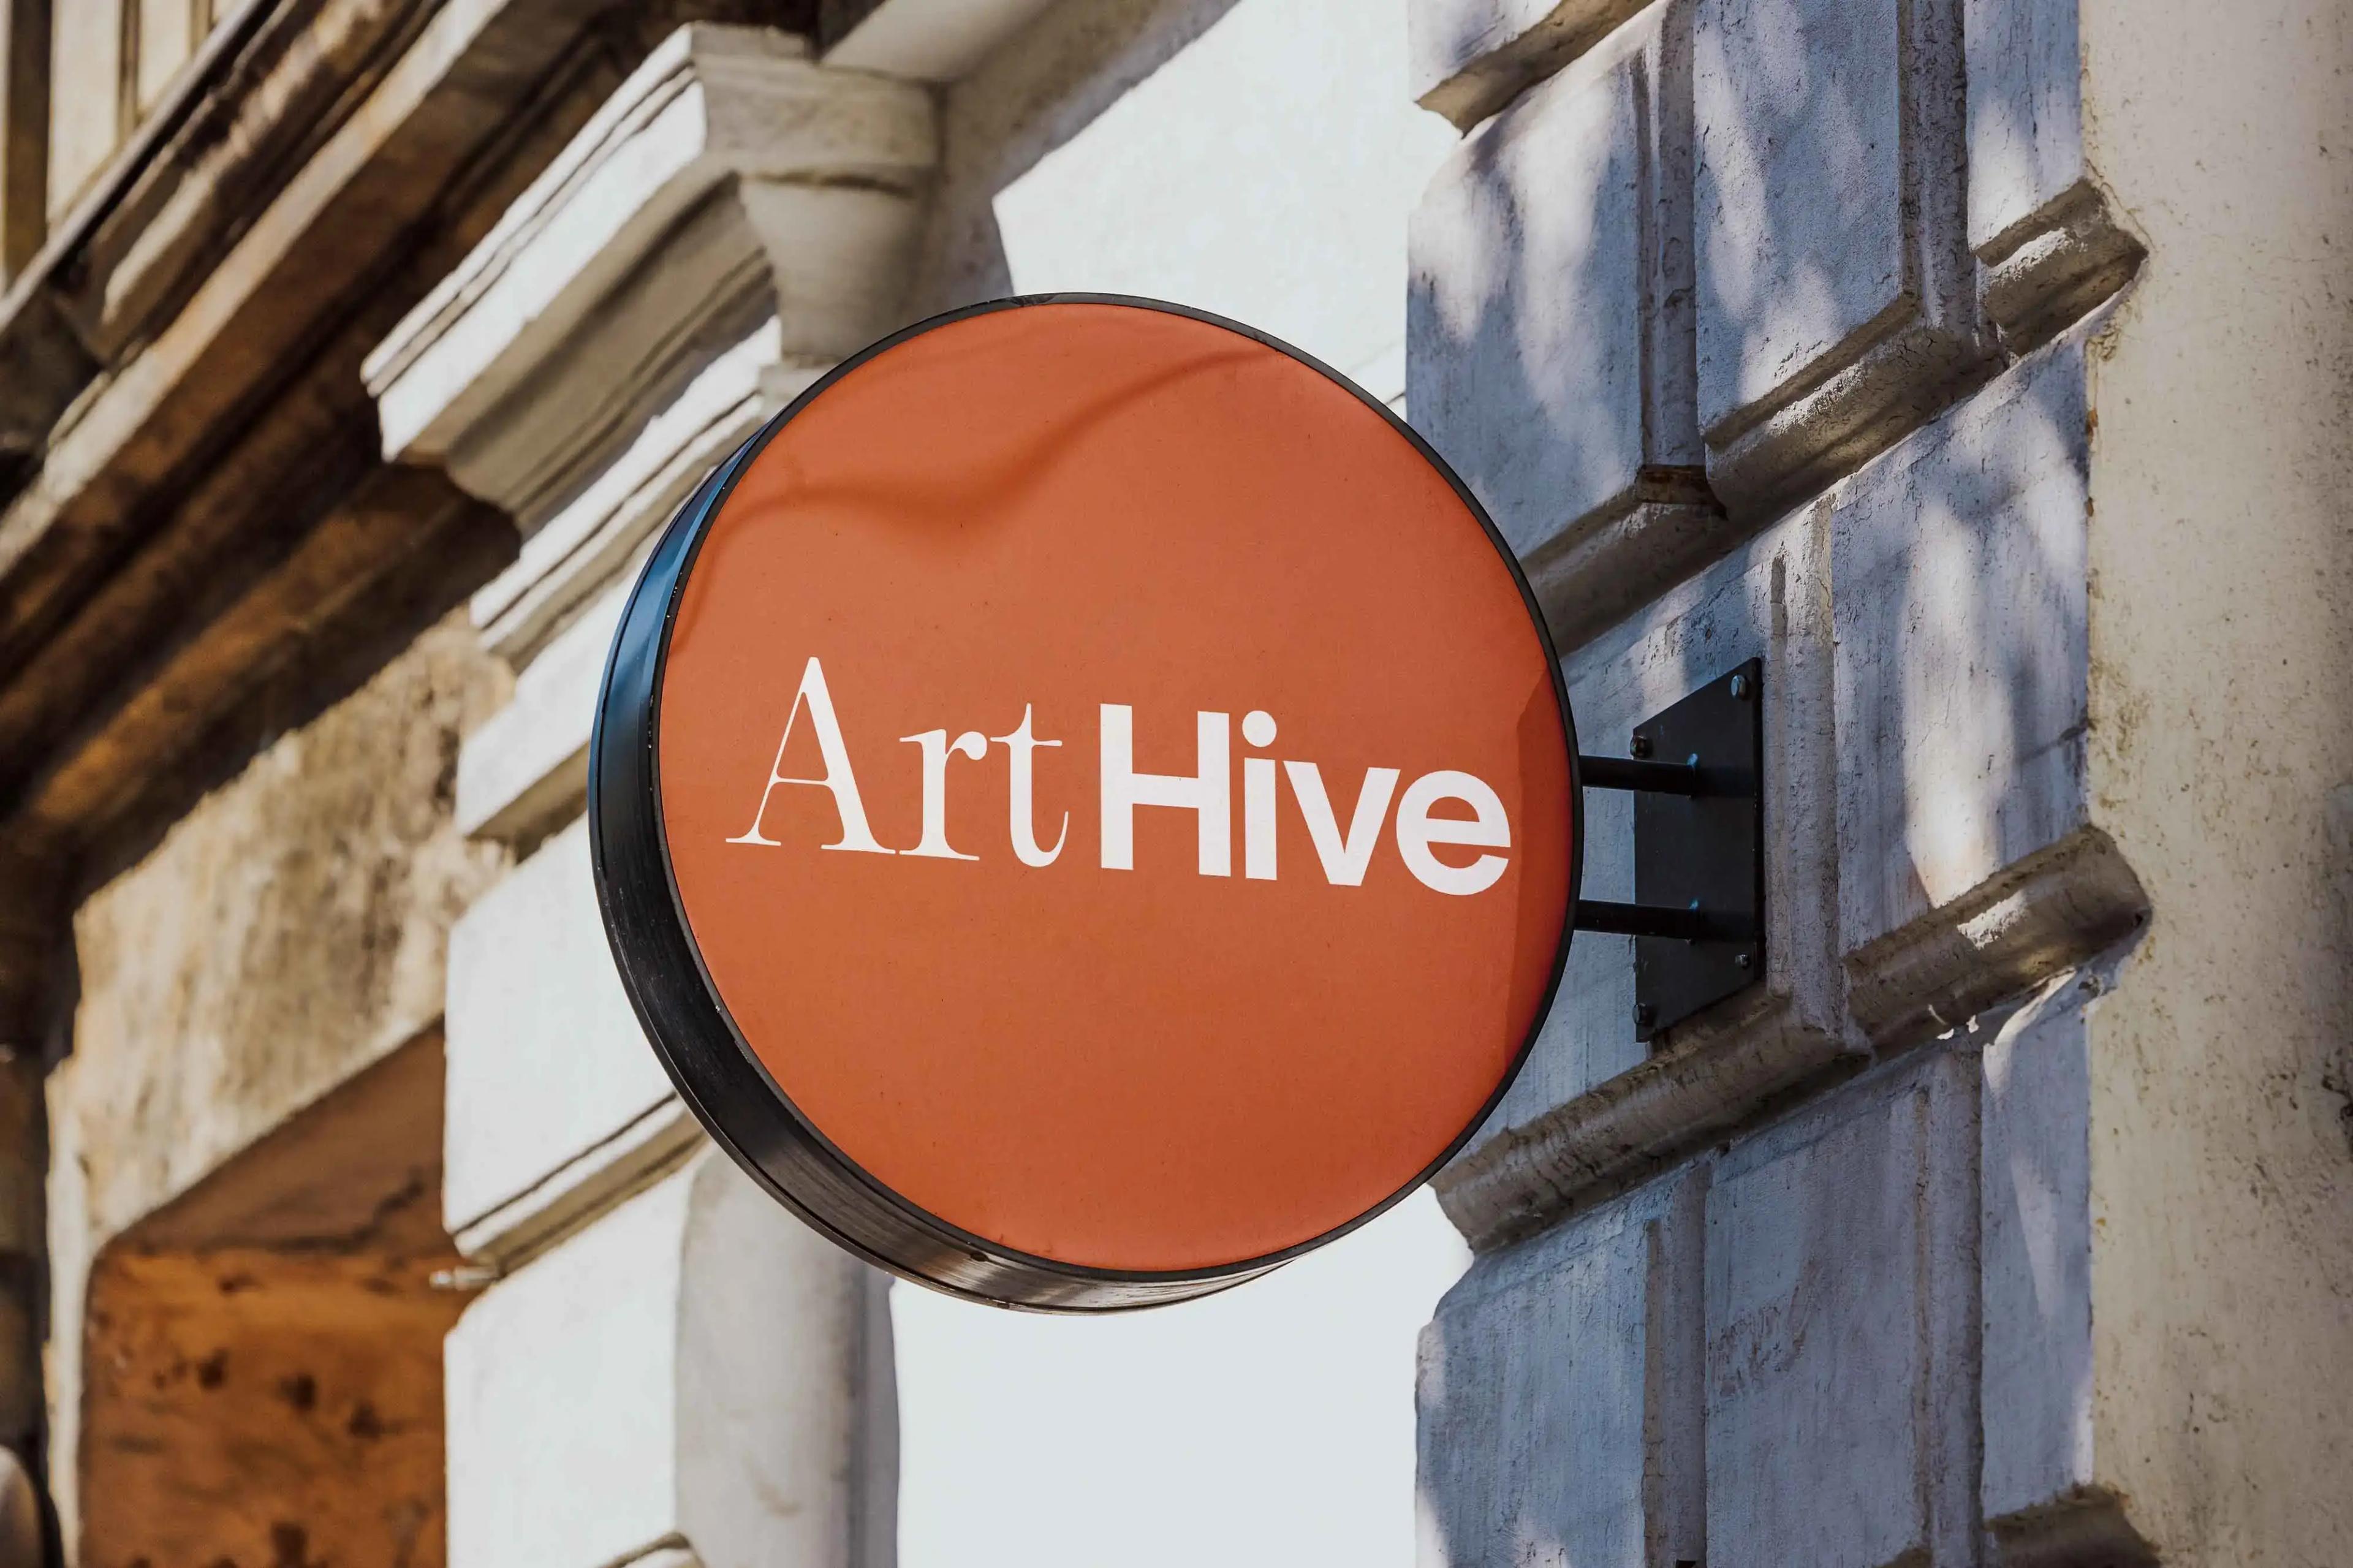 Brand Identity for ArtHive designed by me as a Graphic Designer